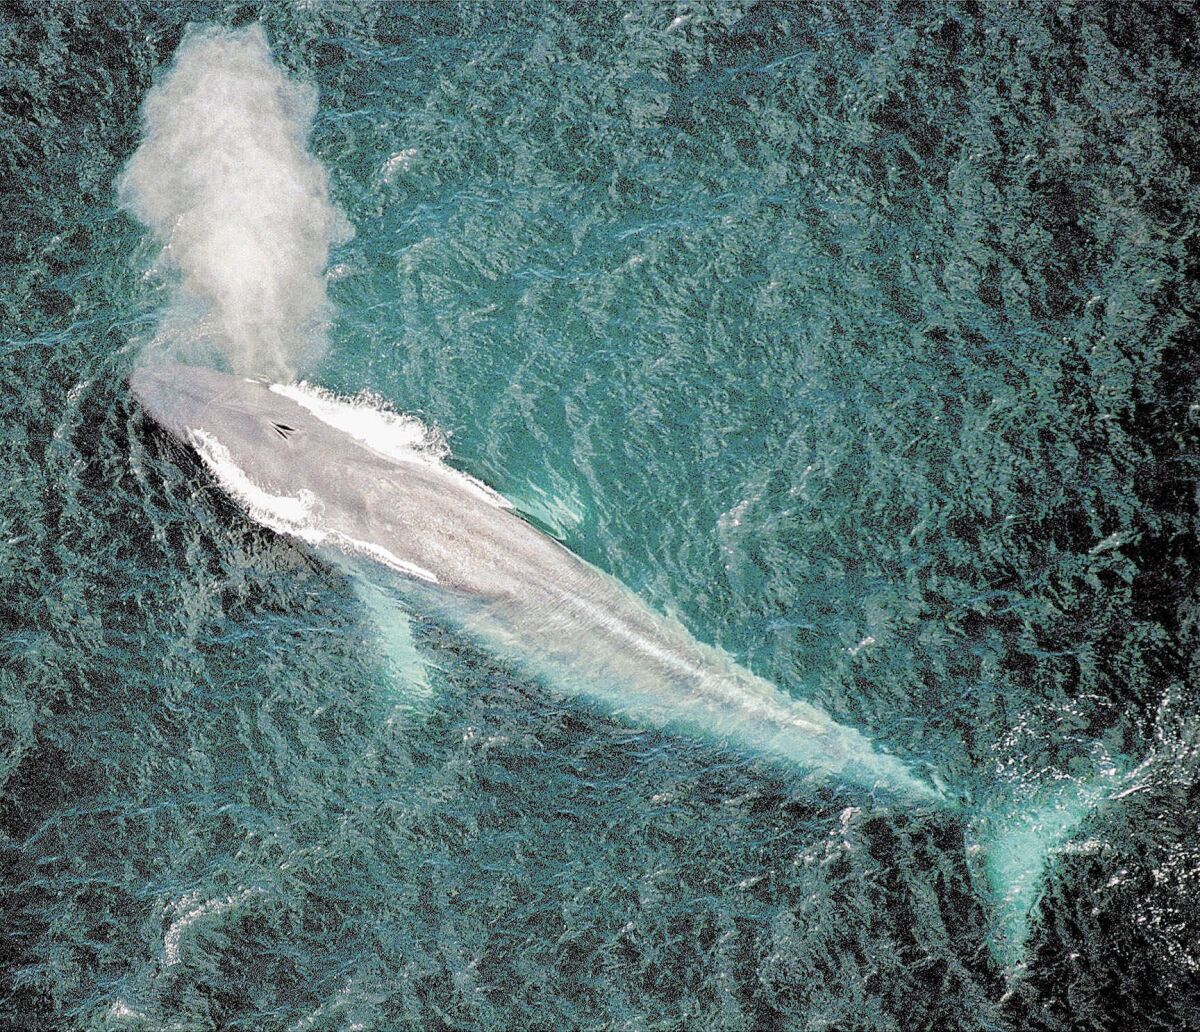 A blue whale swims while spouting water out of its blowhole